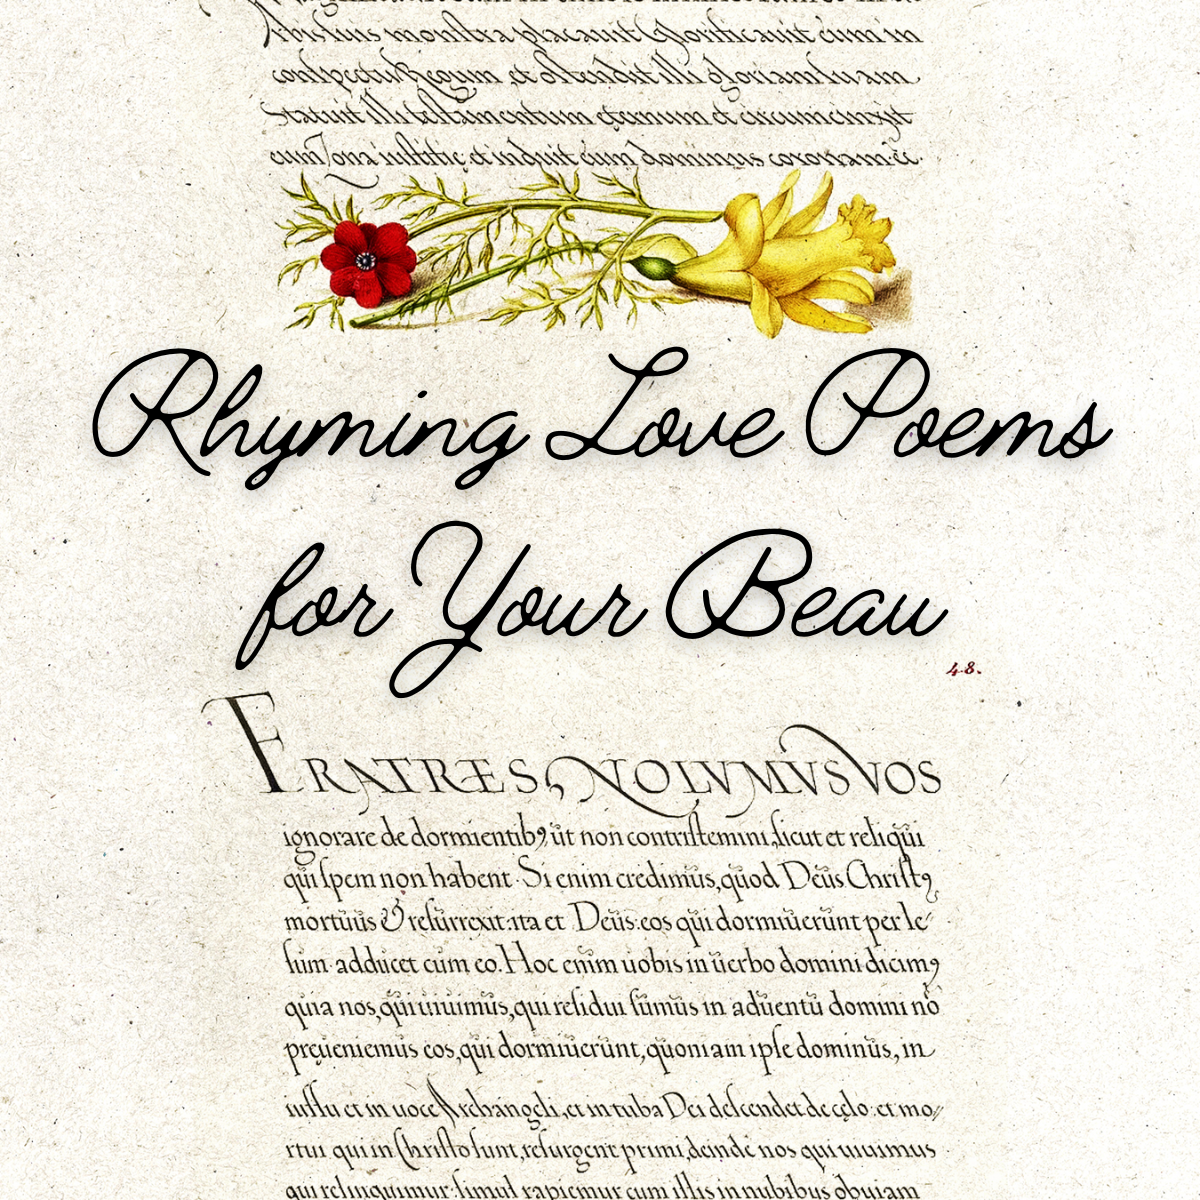 27 Rhyming Love Poems For Your Beau - Aestheticpoems.Com